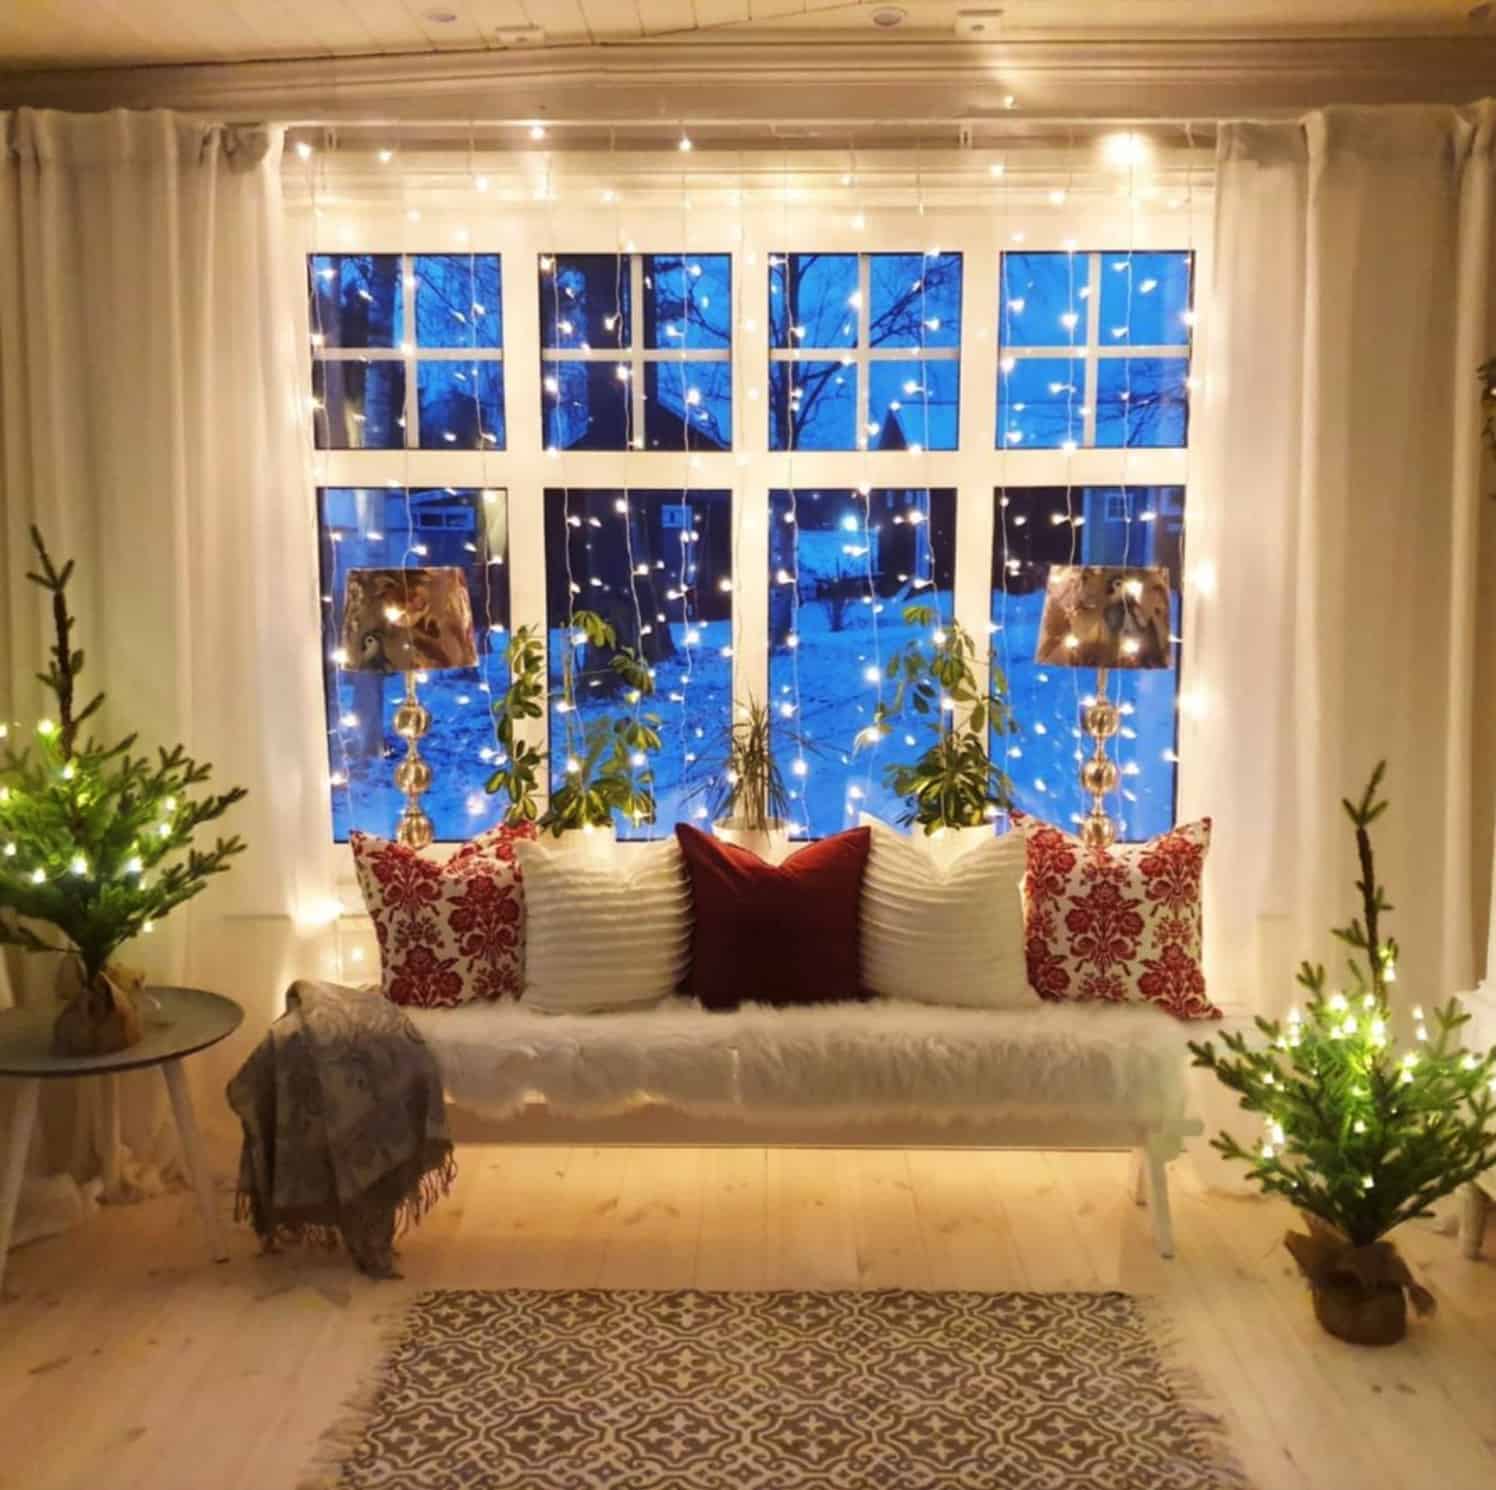 cozy-window-seat-with-led-light-curtains